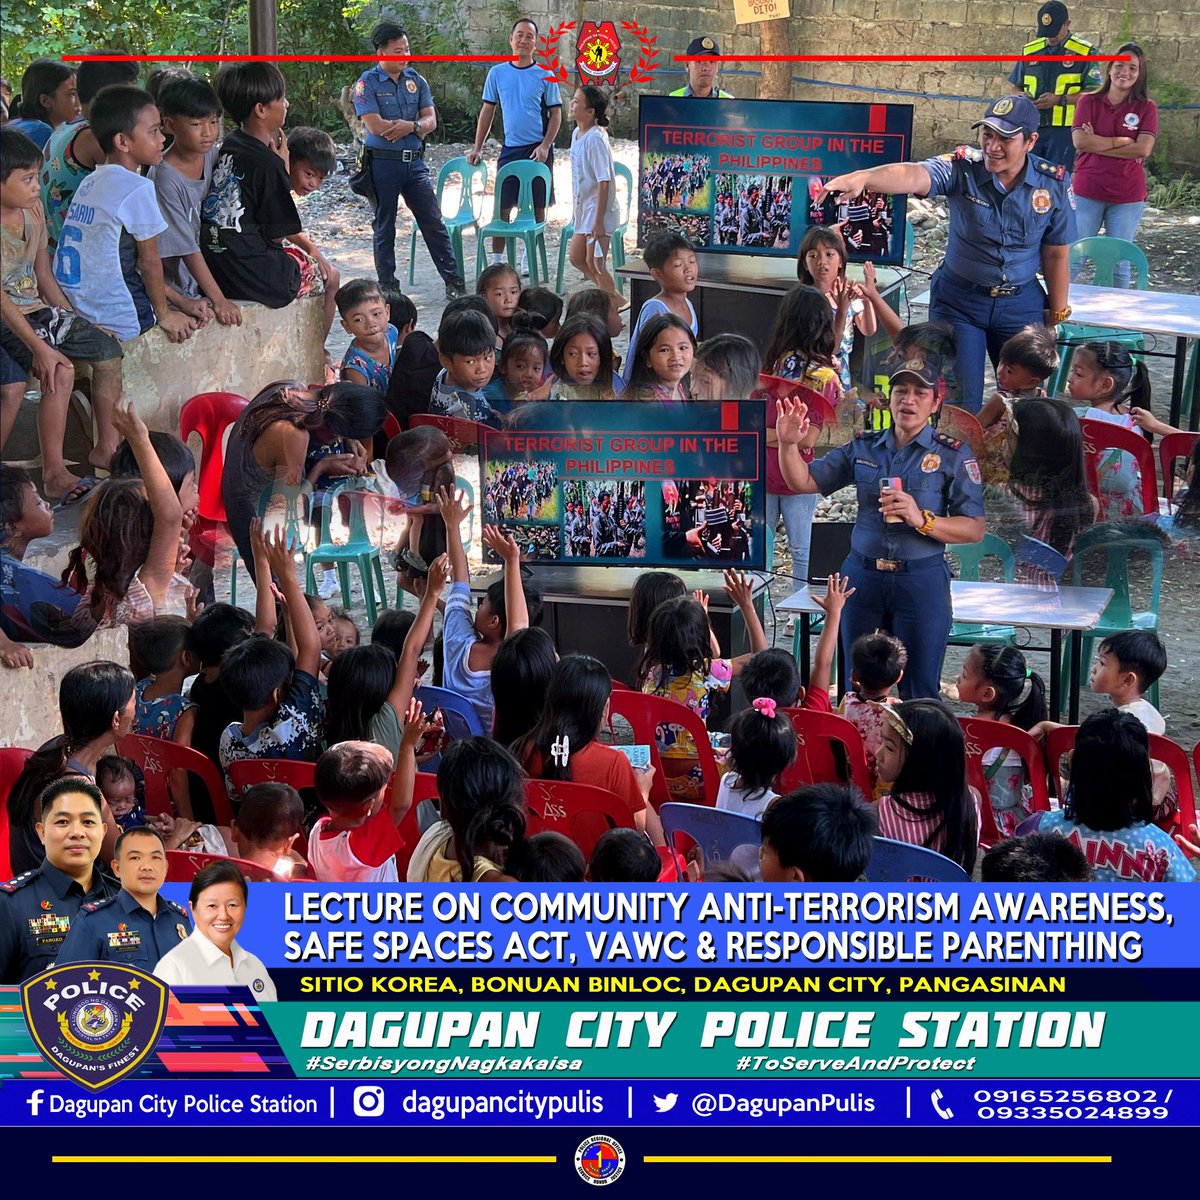 PCPT SHAYNE G DACIEGO, PCAD Officer, Dagupan CPS, under the supervision of PLTCOL BRENDON B PALISOC, OIC, conducted lecture on Community Anti-Terrorism Awareness, SAFE Spaces Act, VAWC and Responsible Parenting during the KASIMBAYANAN sa Barangay at Bonuan Binloc, Dagupan City.